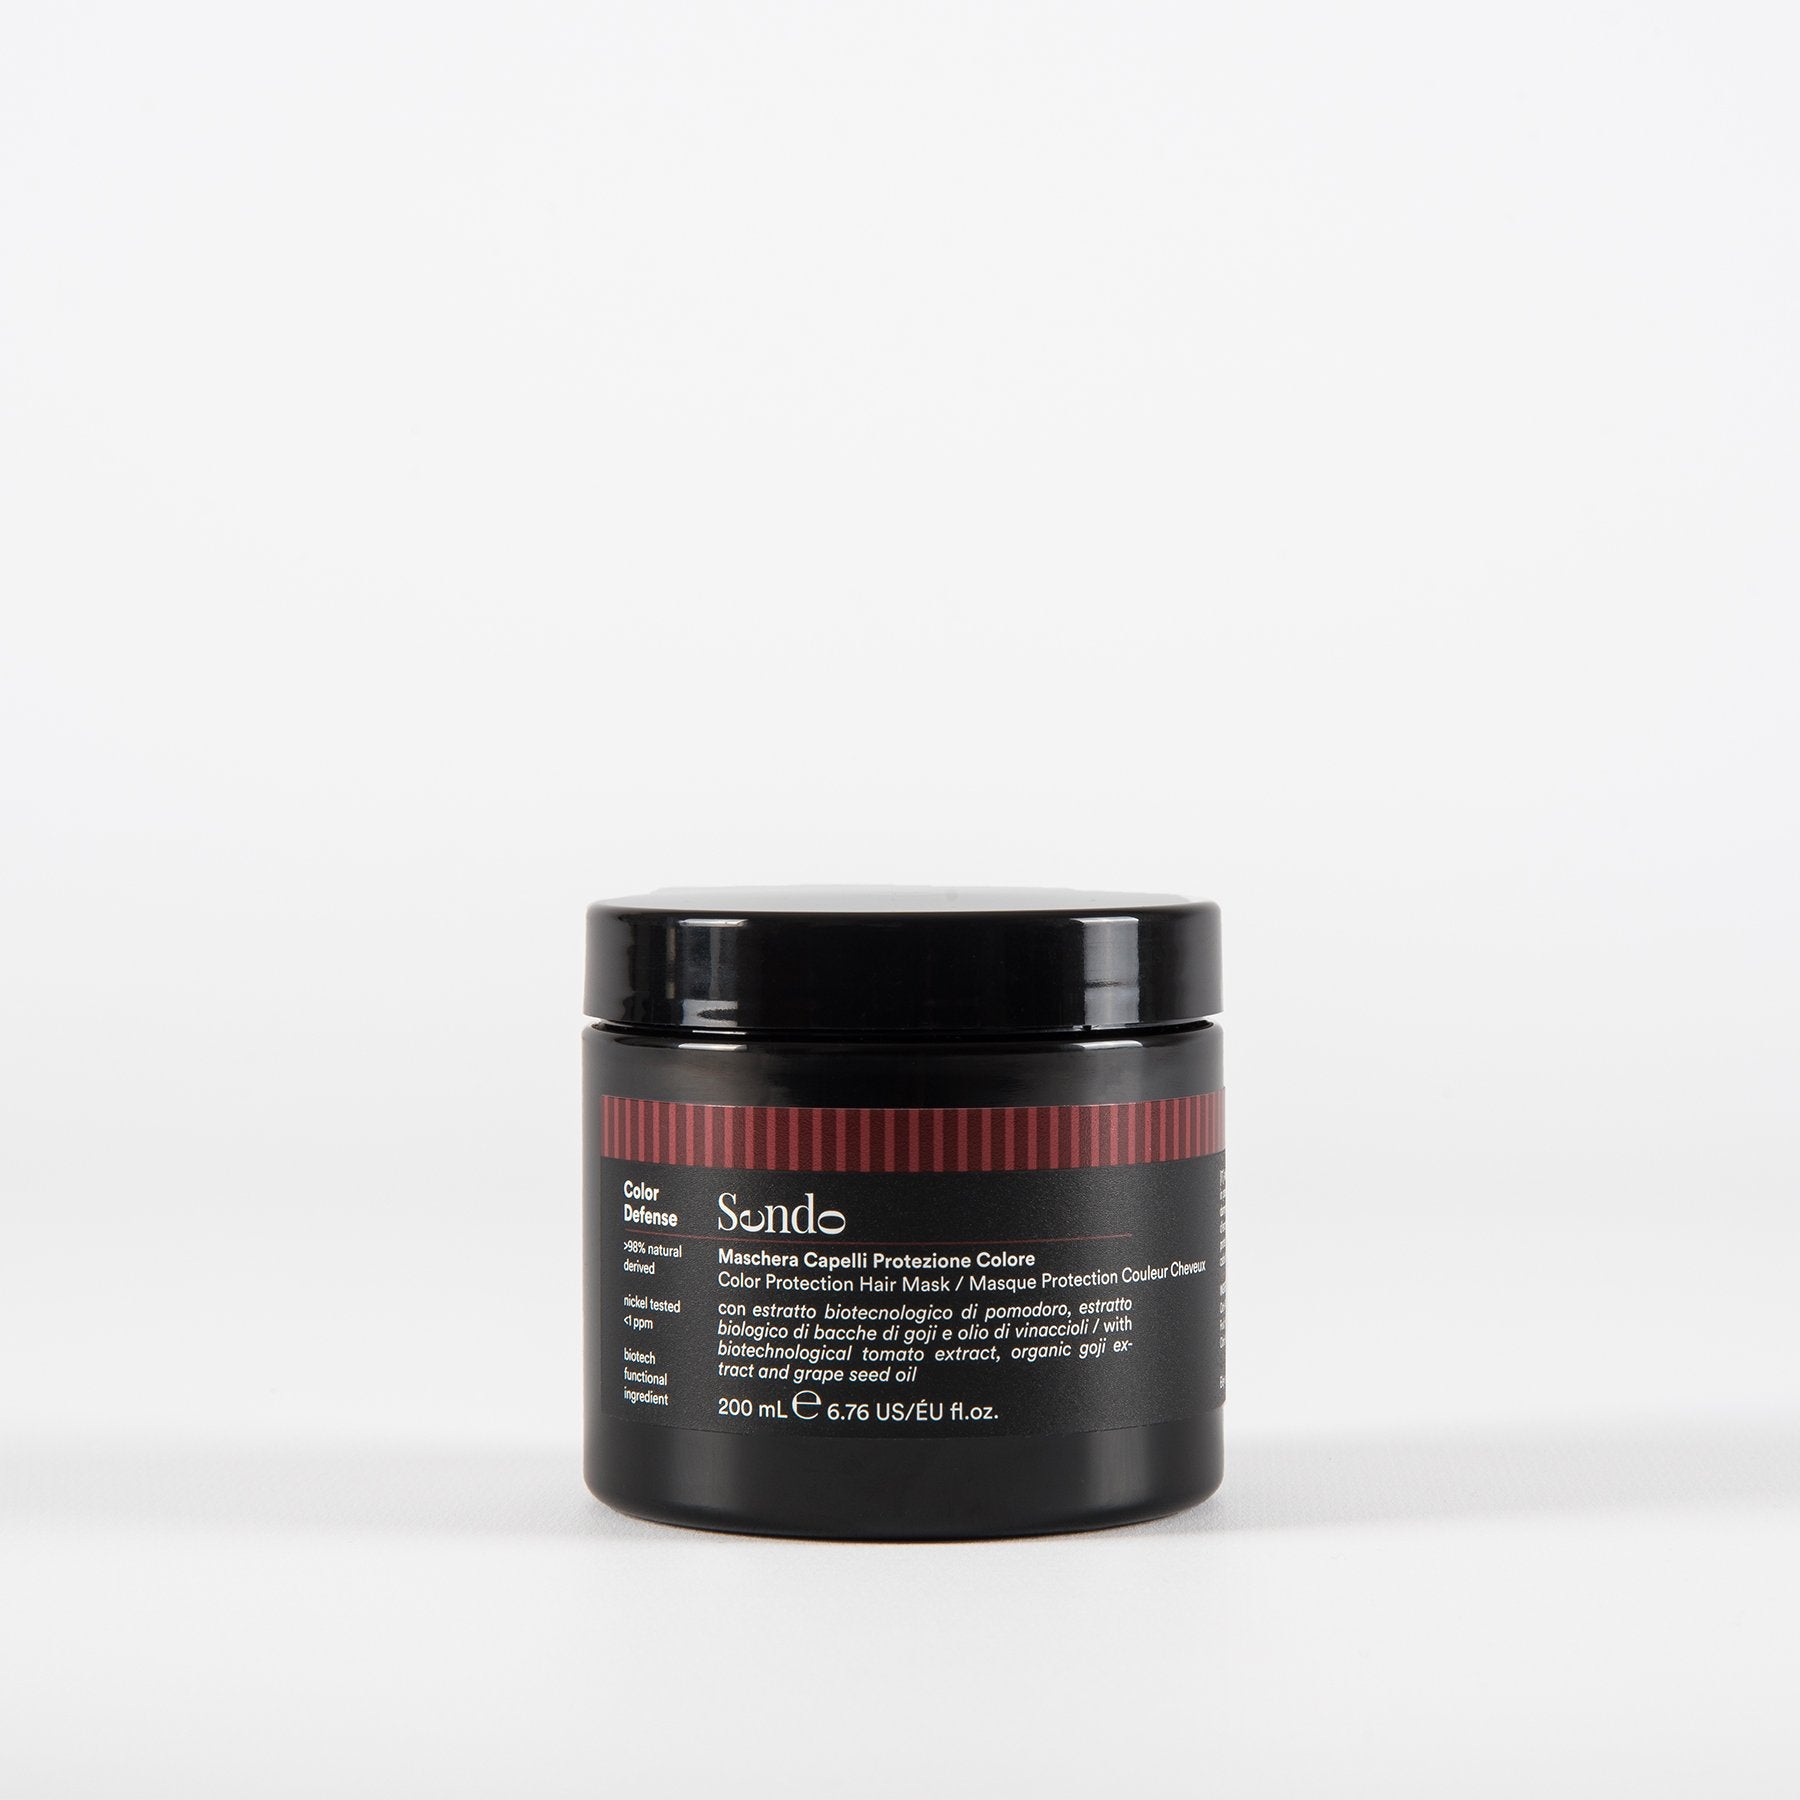 COLOR PROTECTION  HAIR MASK